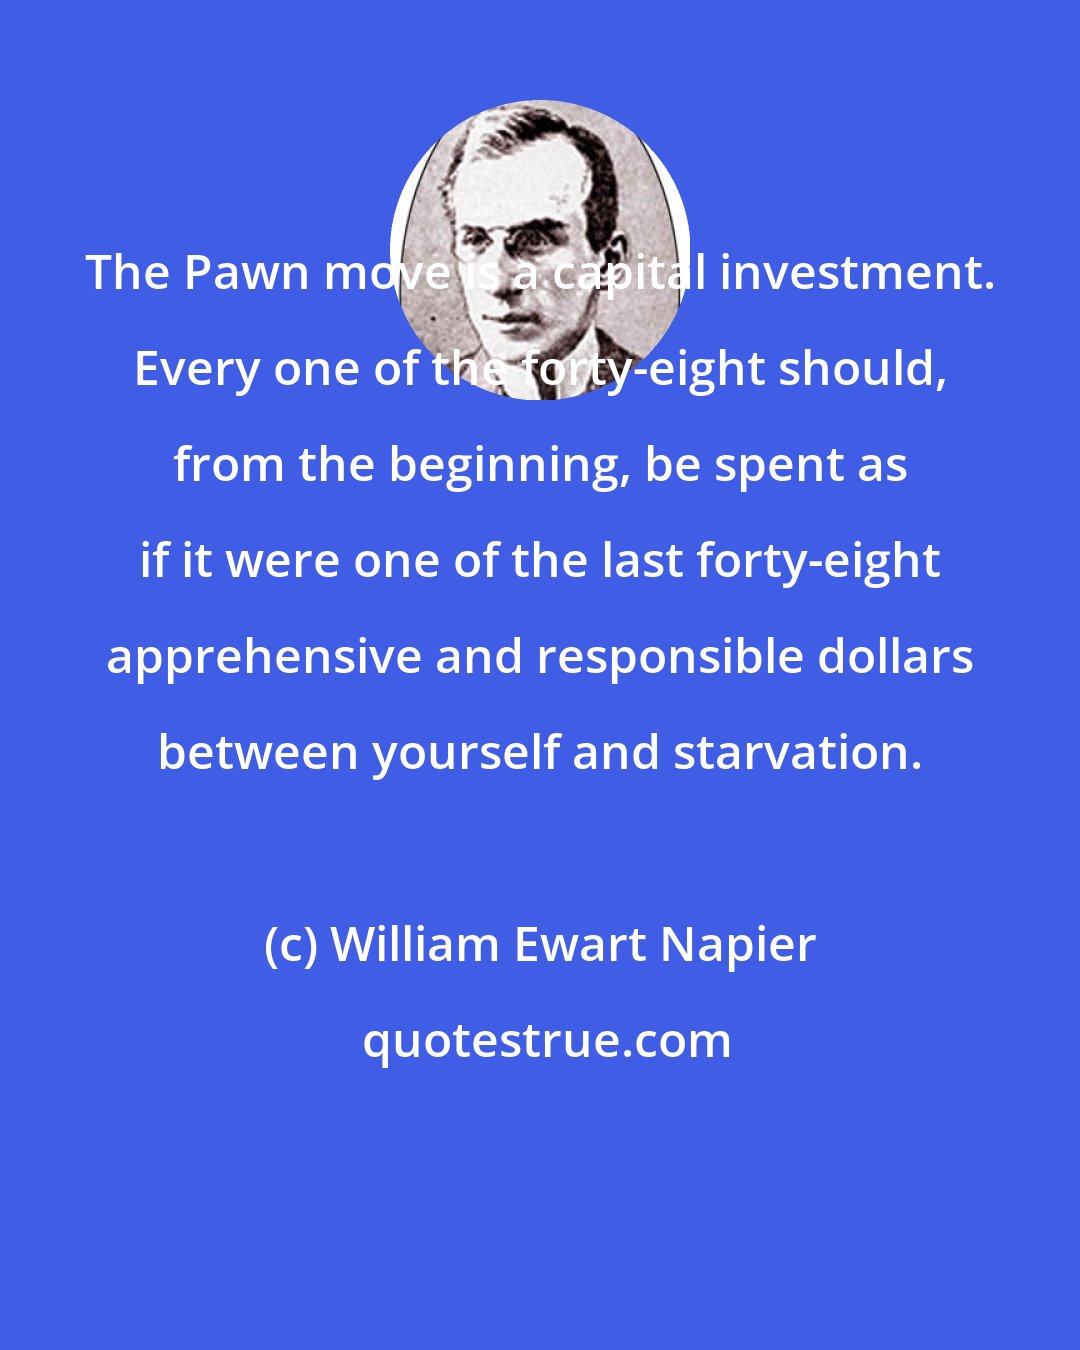 William Ewart Napier: The Pawn move is a capital investment. Every one of the forty-eight should, from the beginning, be spent as if it were one of the last forty-eight apprehensive and responsible dollars between yourself and starvation.